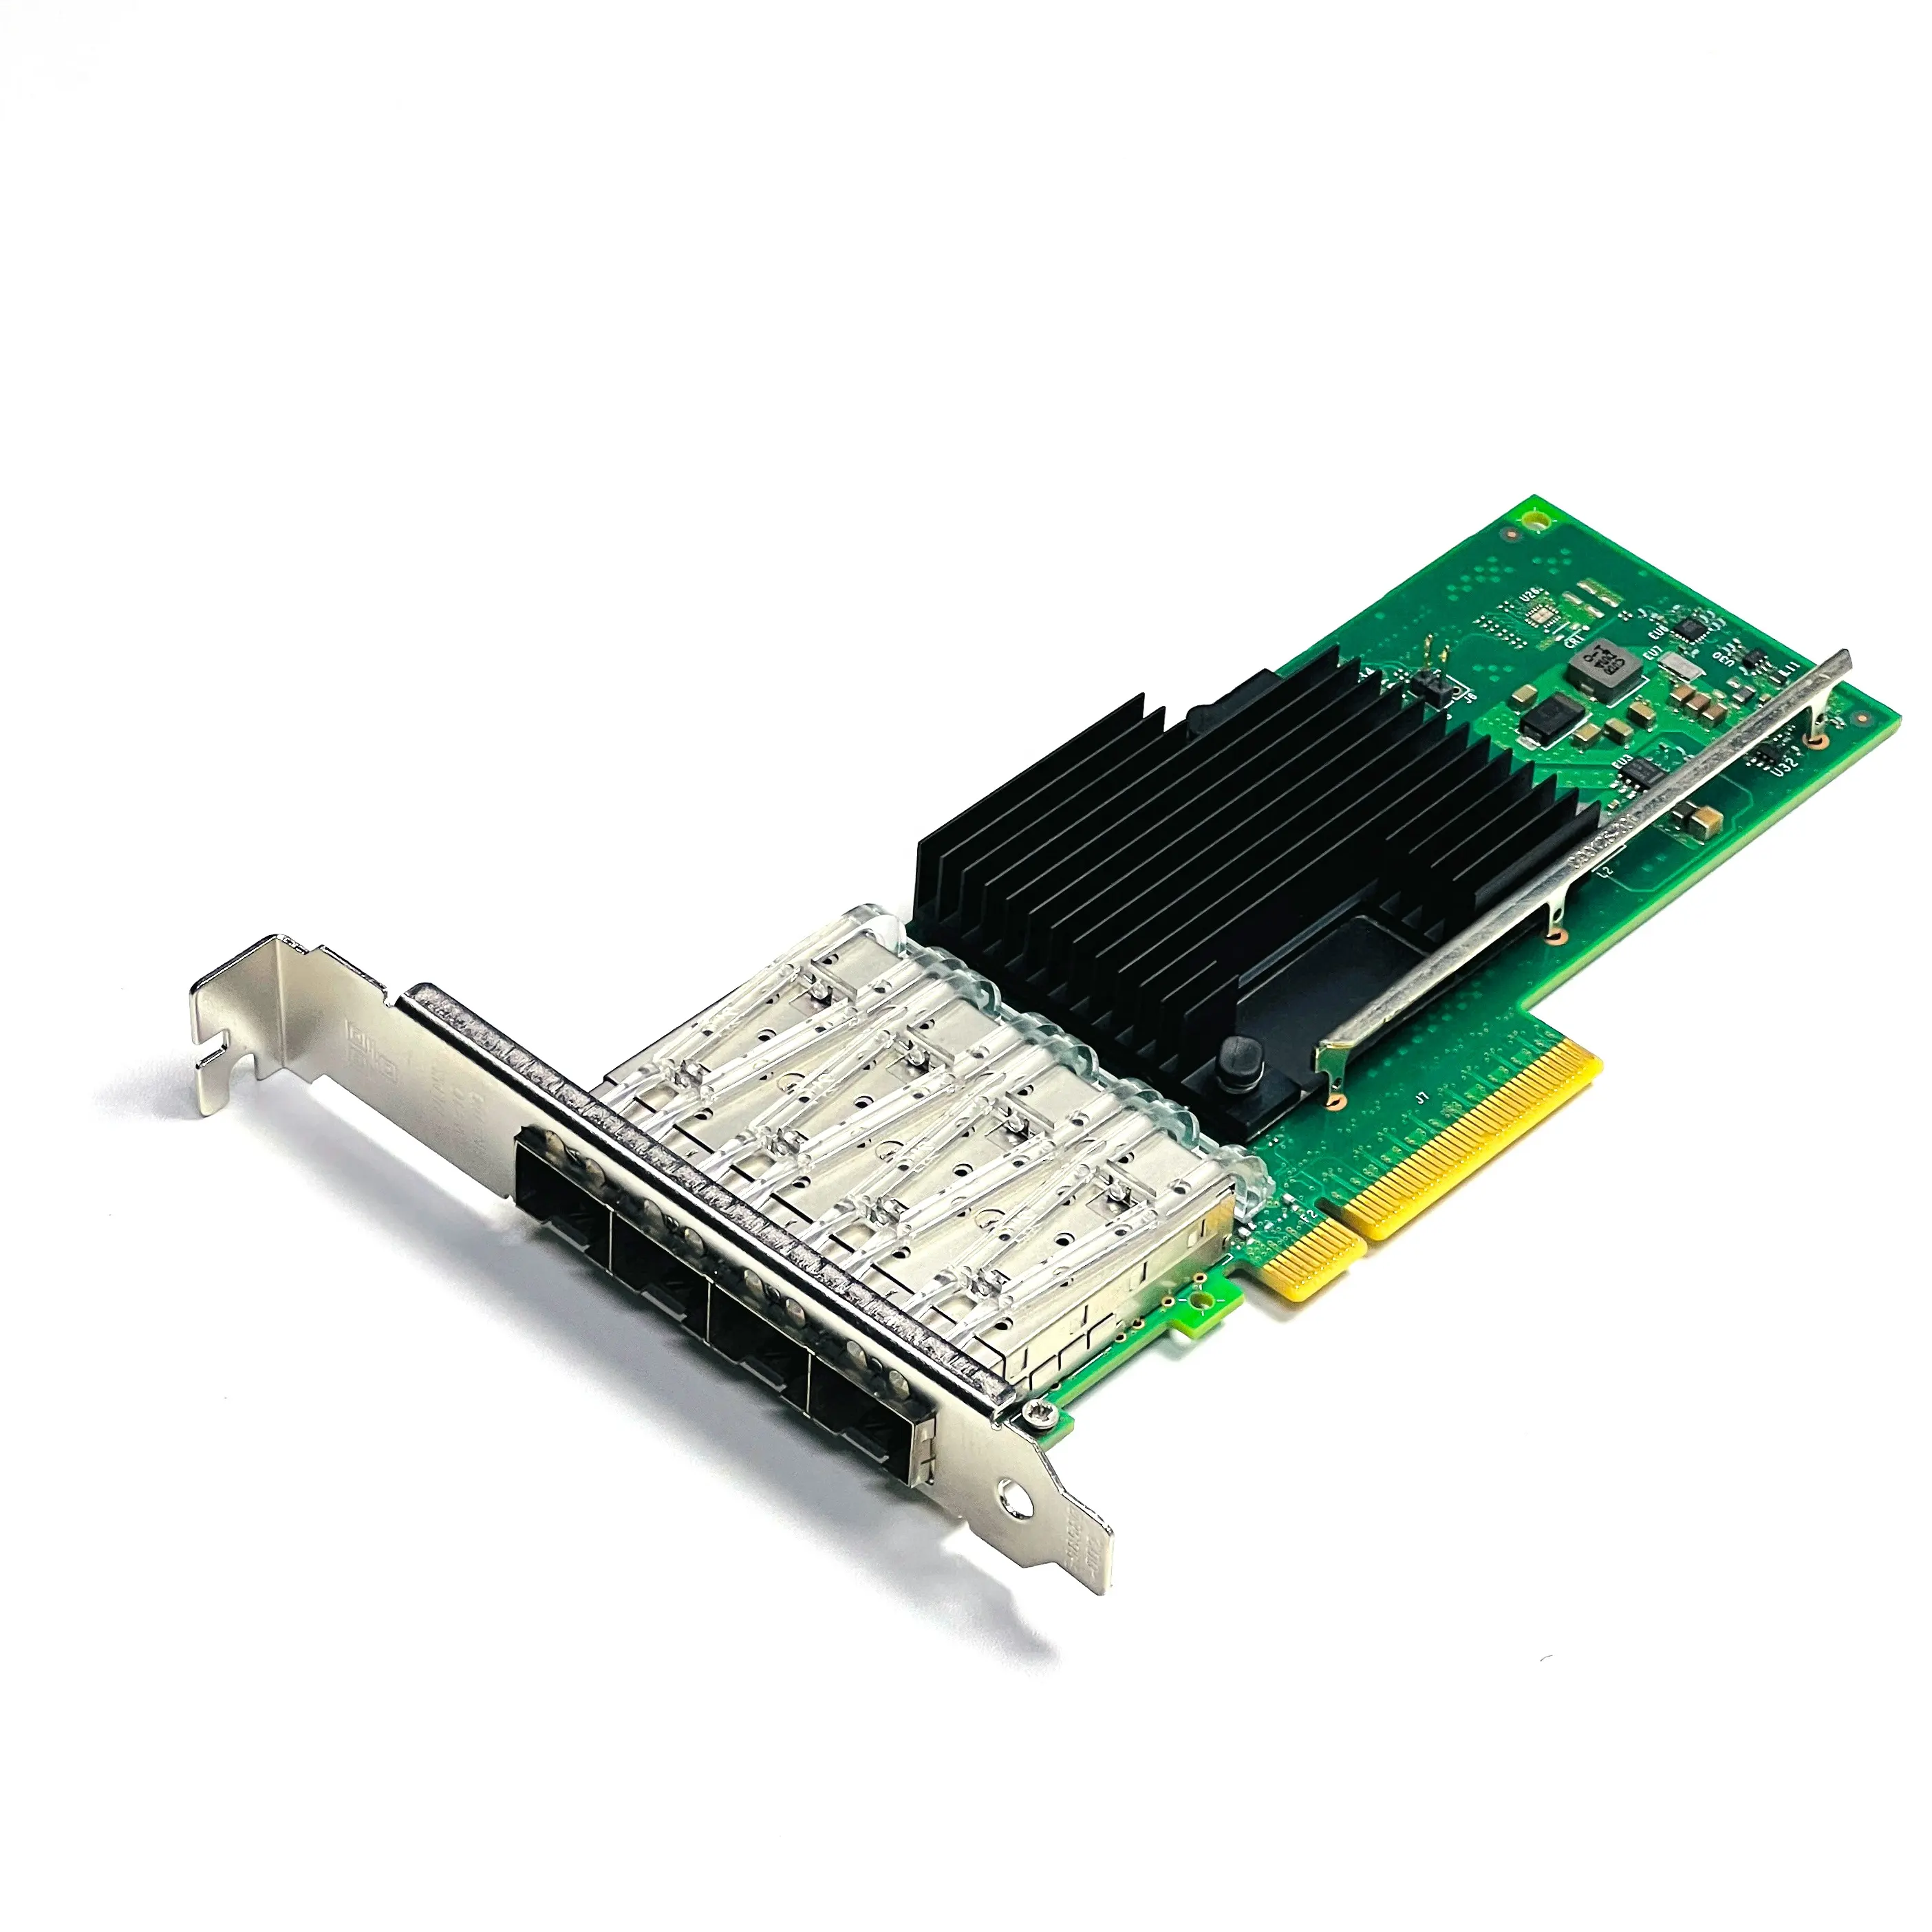 Intel X710-DA4 Low Profile 10GB NIC Card PCIe Wired and Wireless Adapter for Server Networking RJ45 Interface X710DA2BLK"